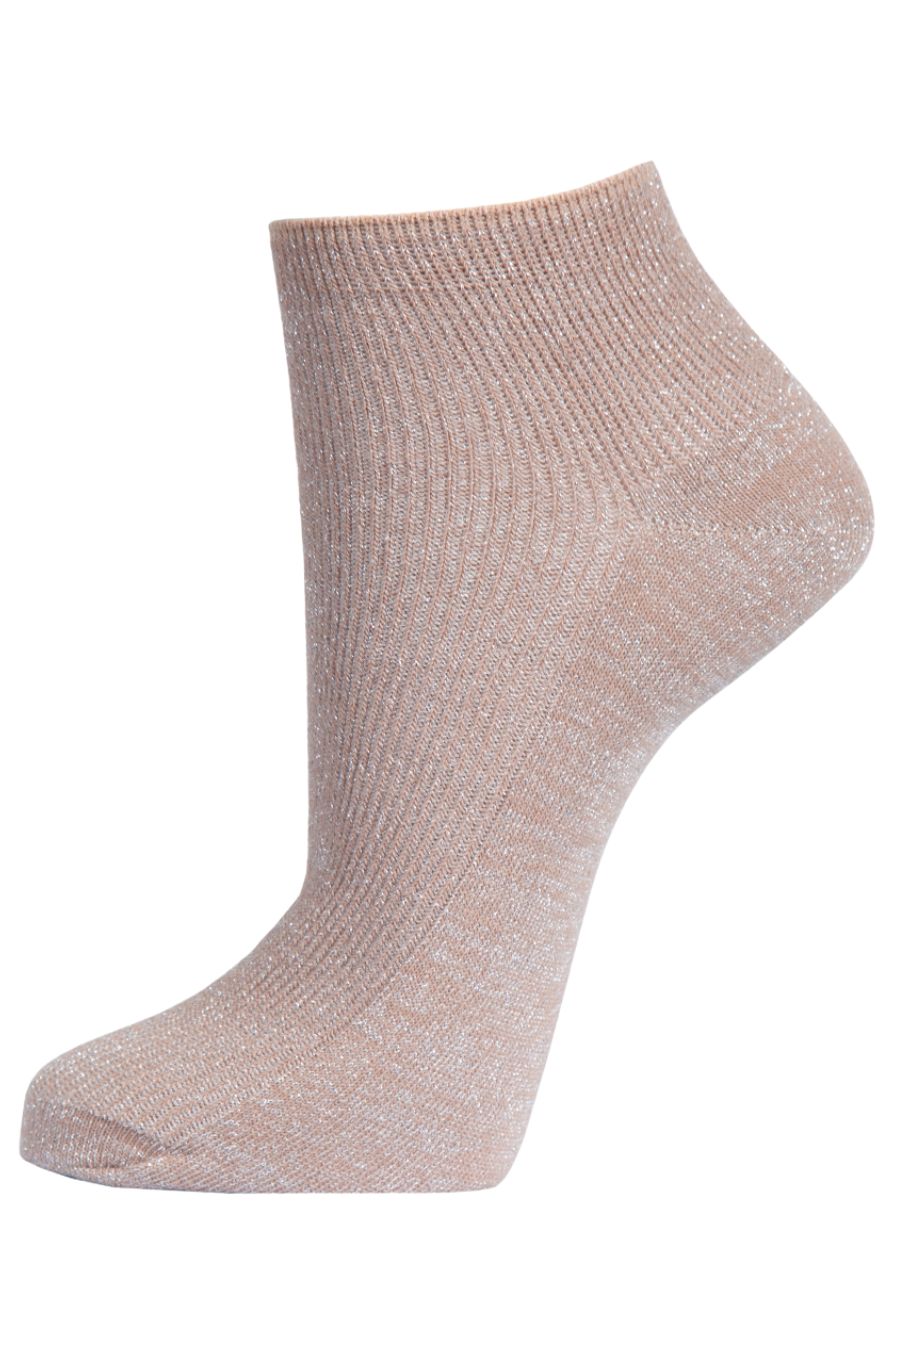 beige trainer socks with an all over silver glitter shimmer